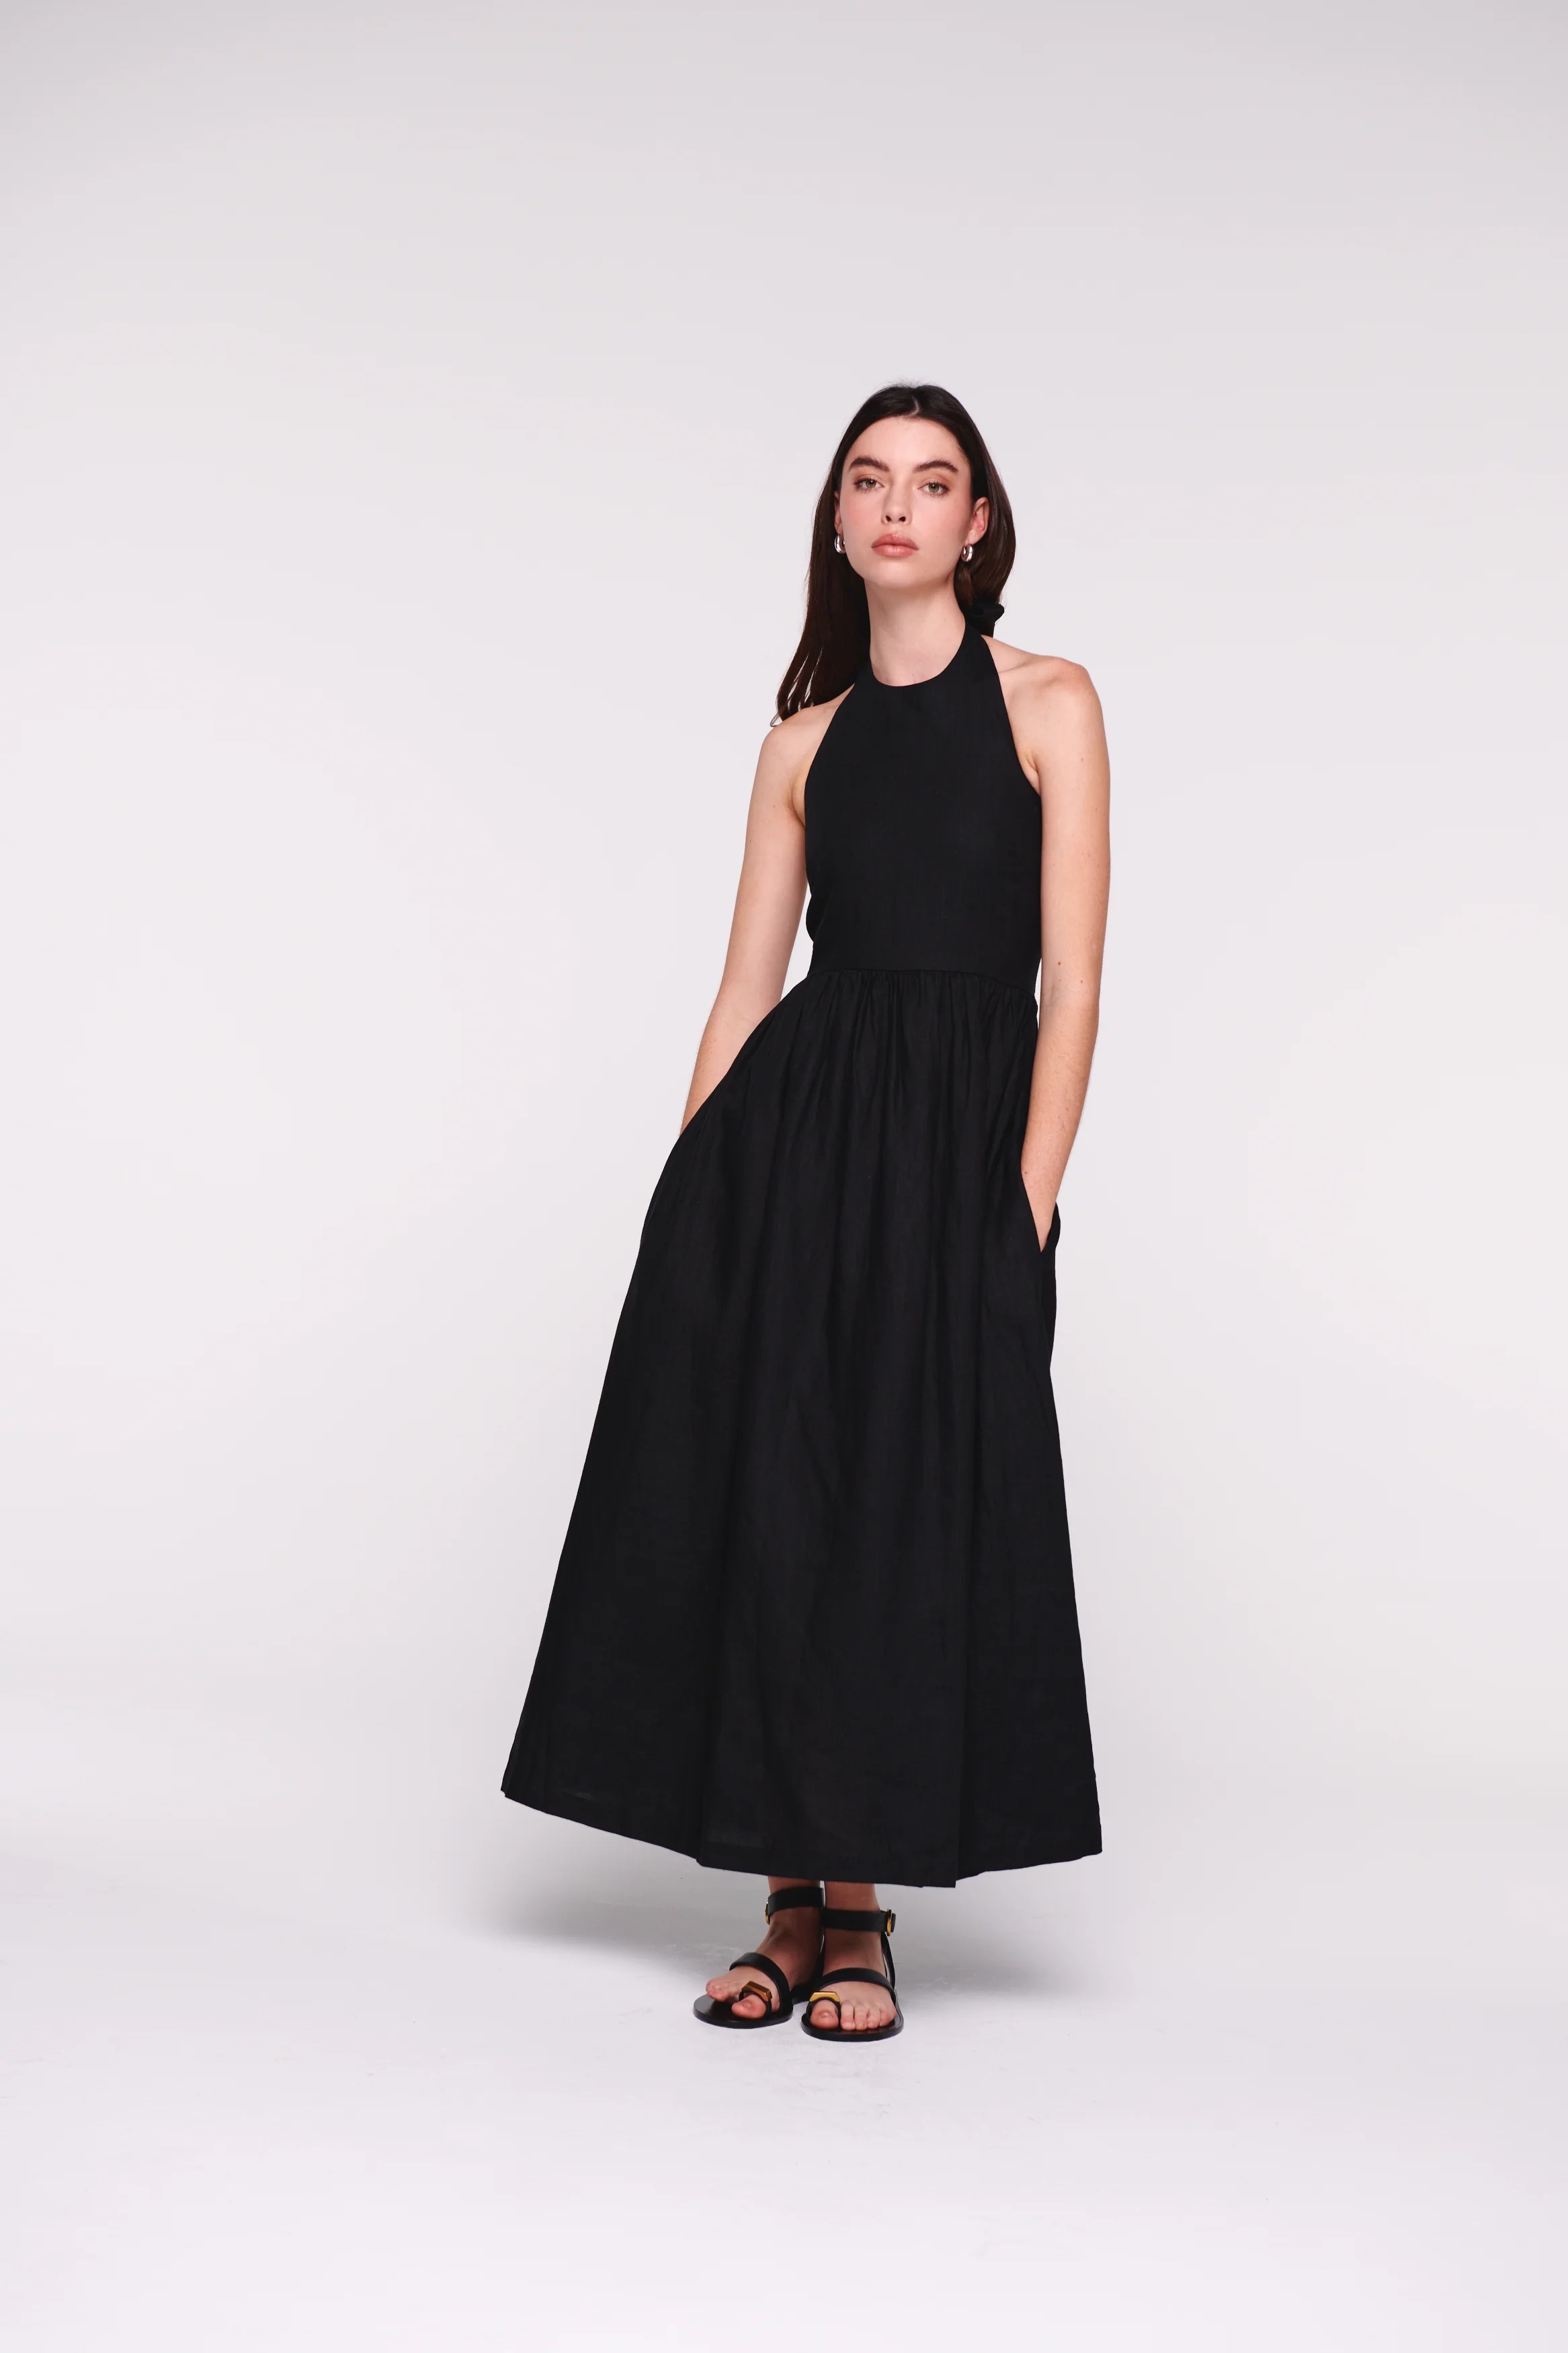 30 Linen Dresses That We Can't Stop Thinking About | Who What Wear UK